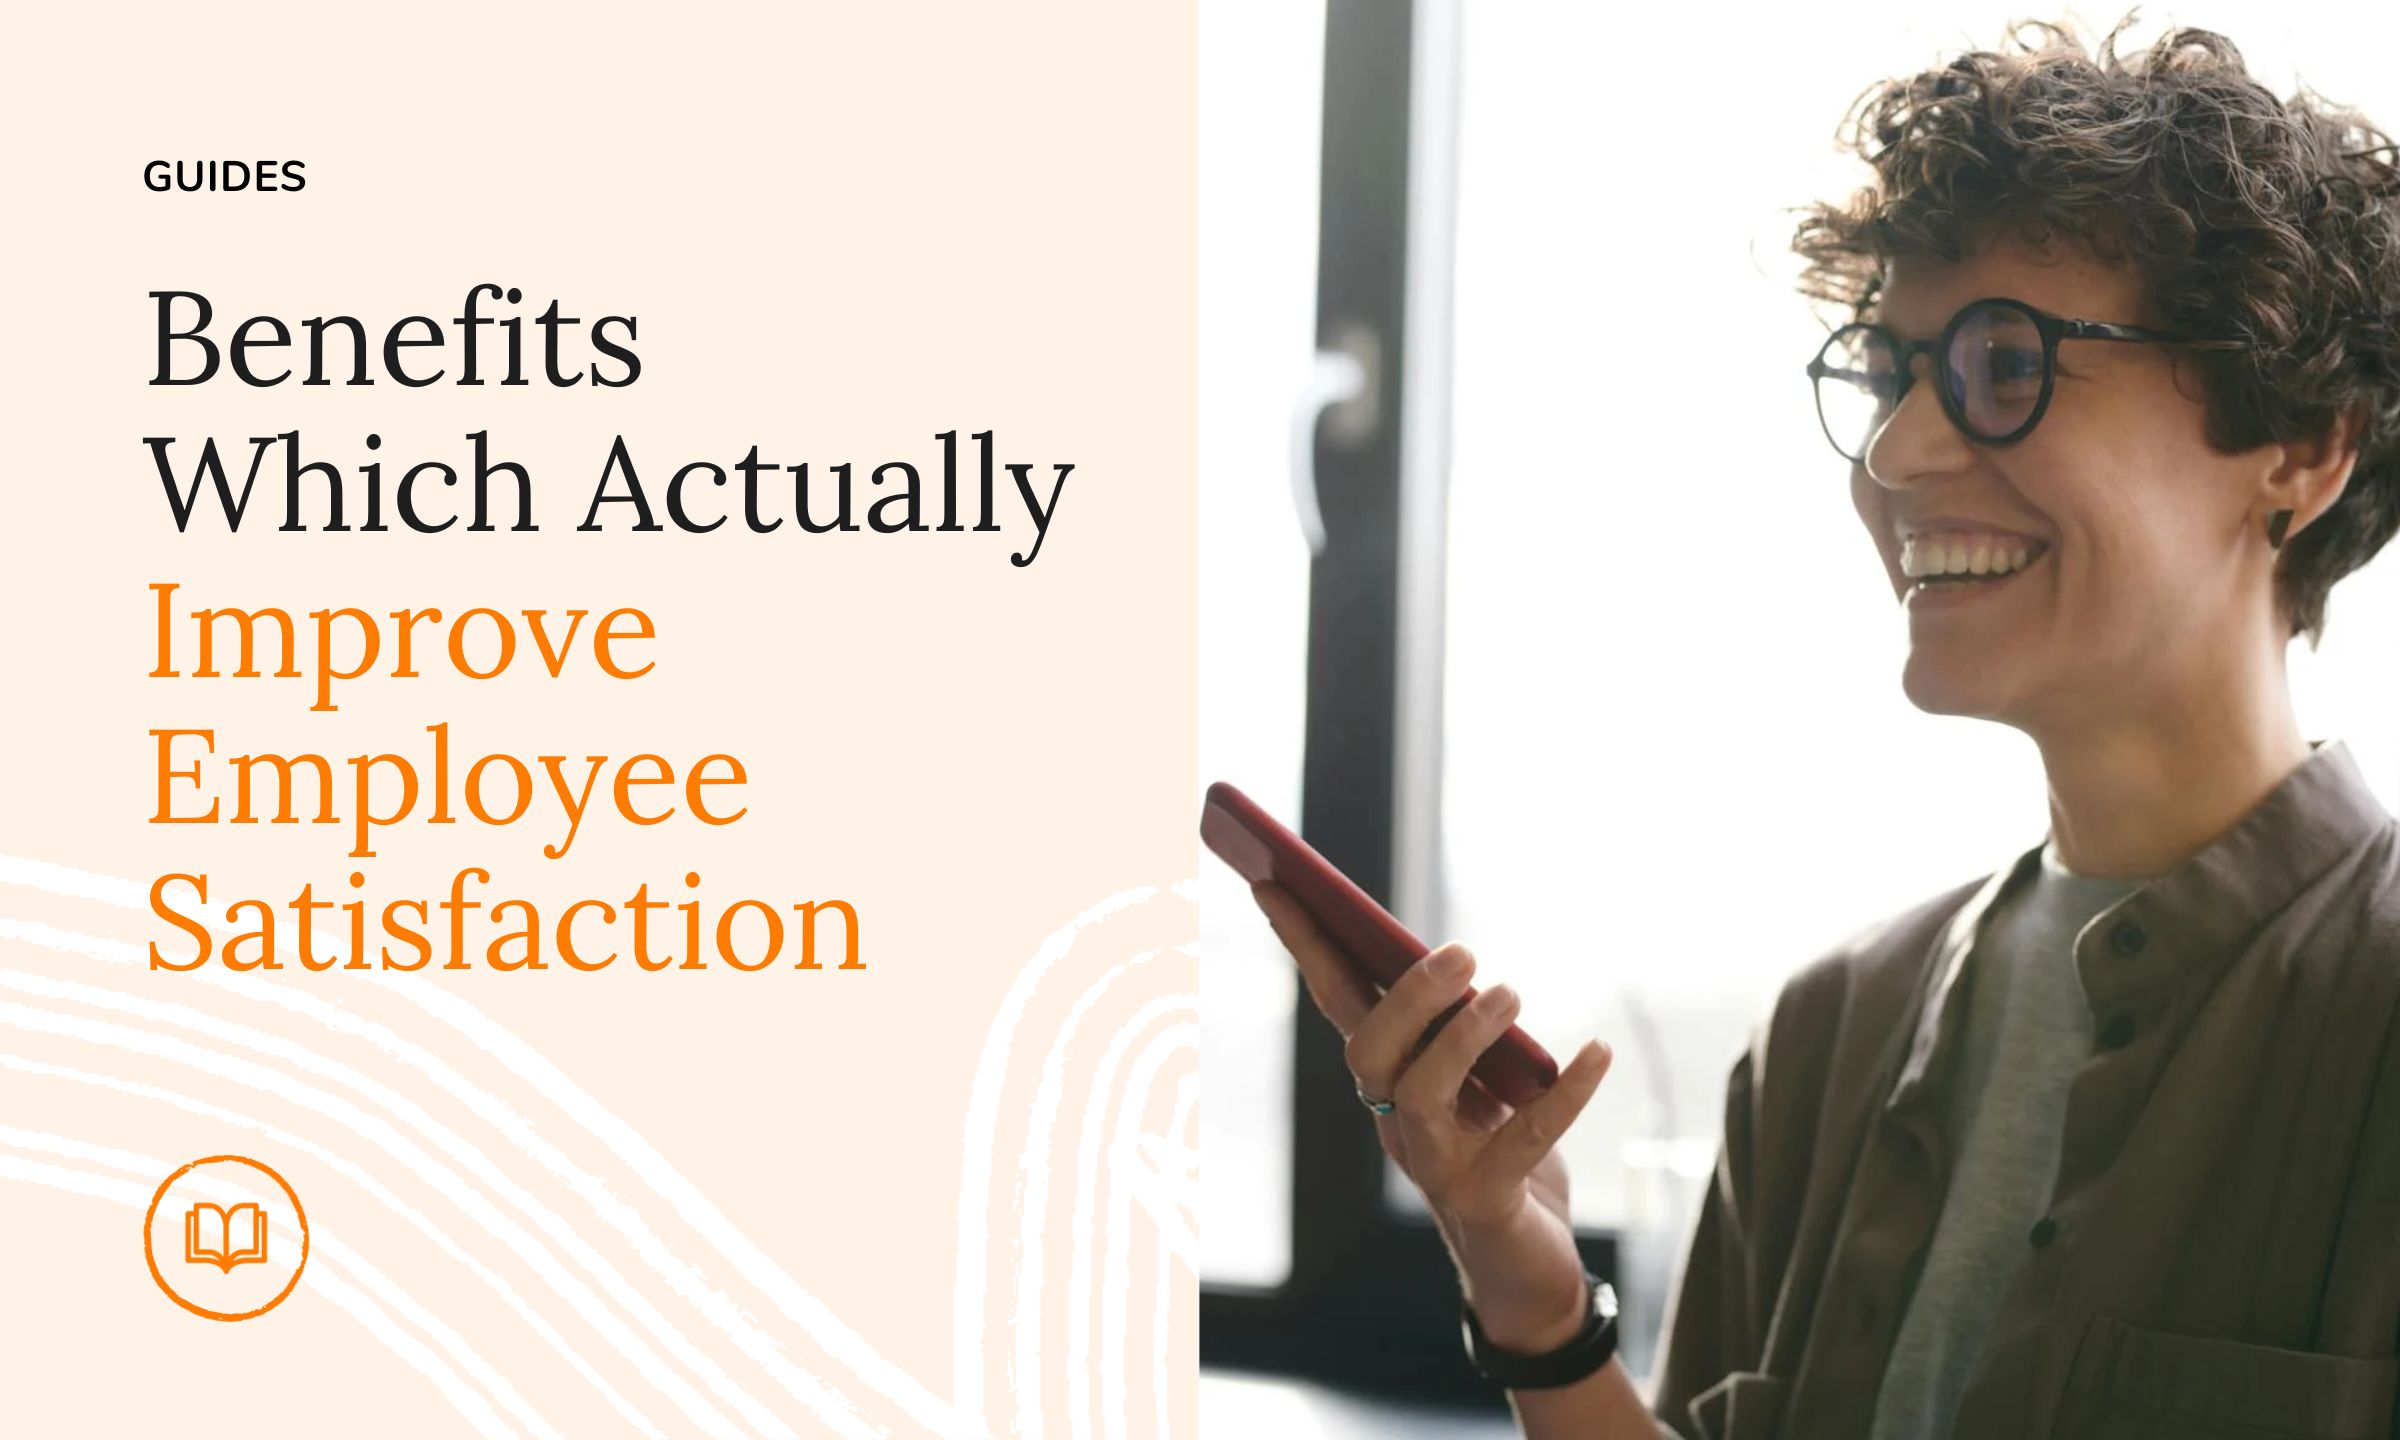 7 Benefits Which Actually Improve Employee Satisfaction